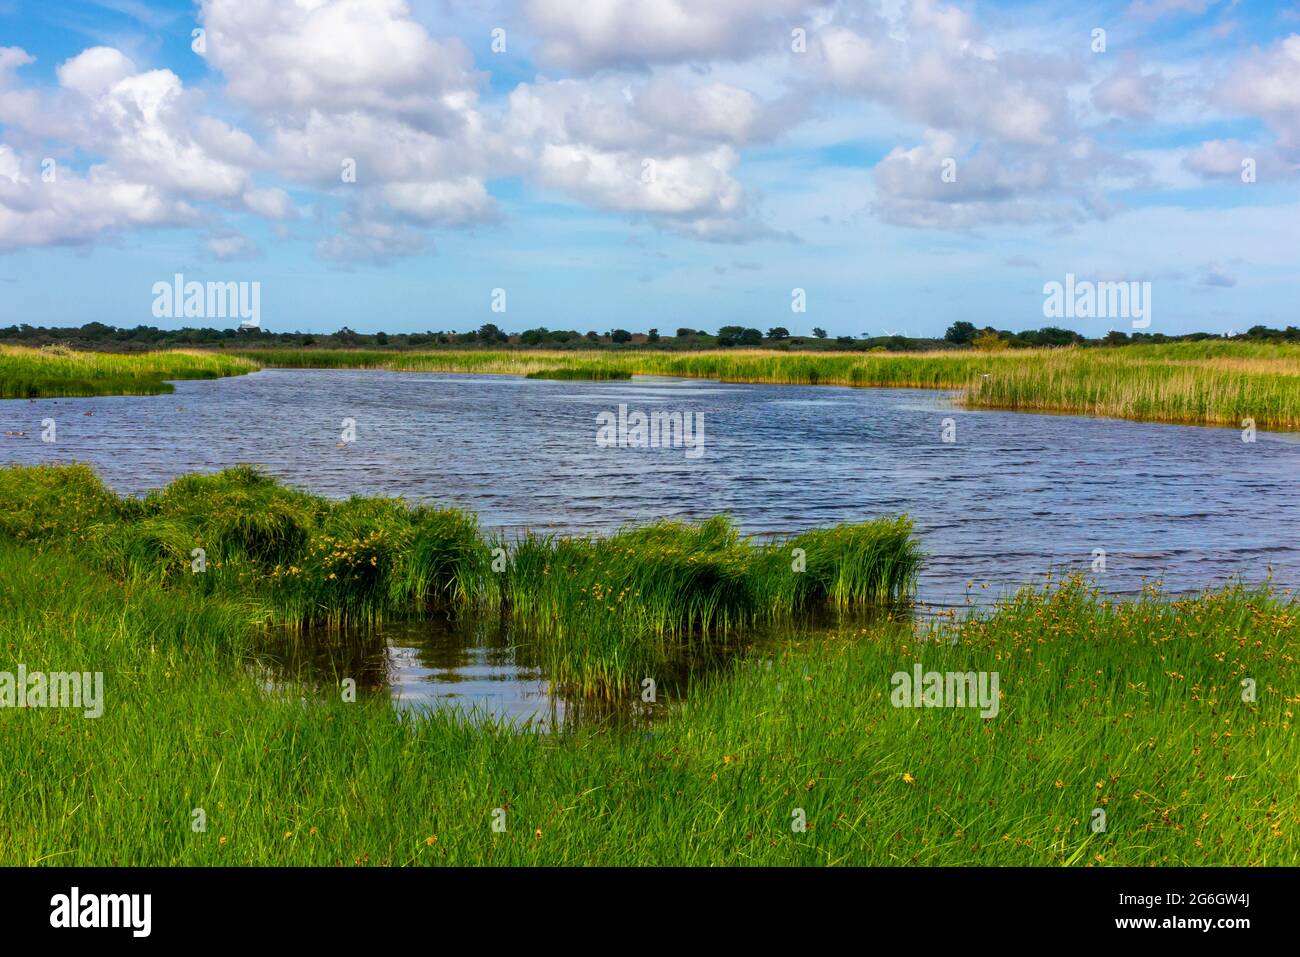 Summer landscape at the Mere at Gibraltar Point National Nature Reserve near Skegness Lincolnshire on the east coast of England UK Stock Photo